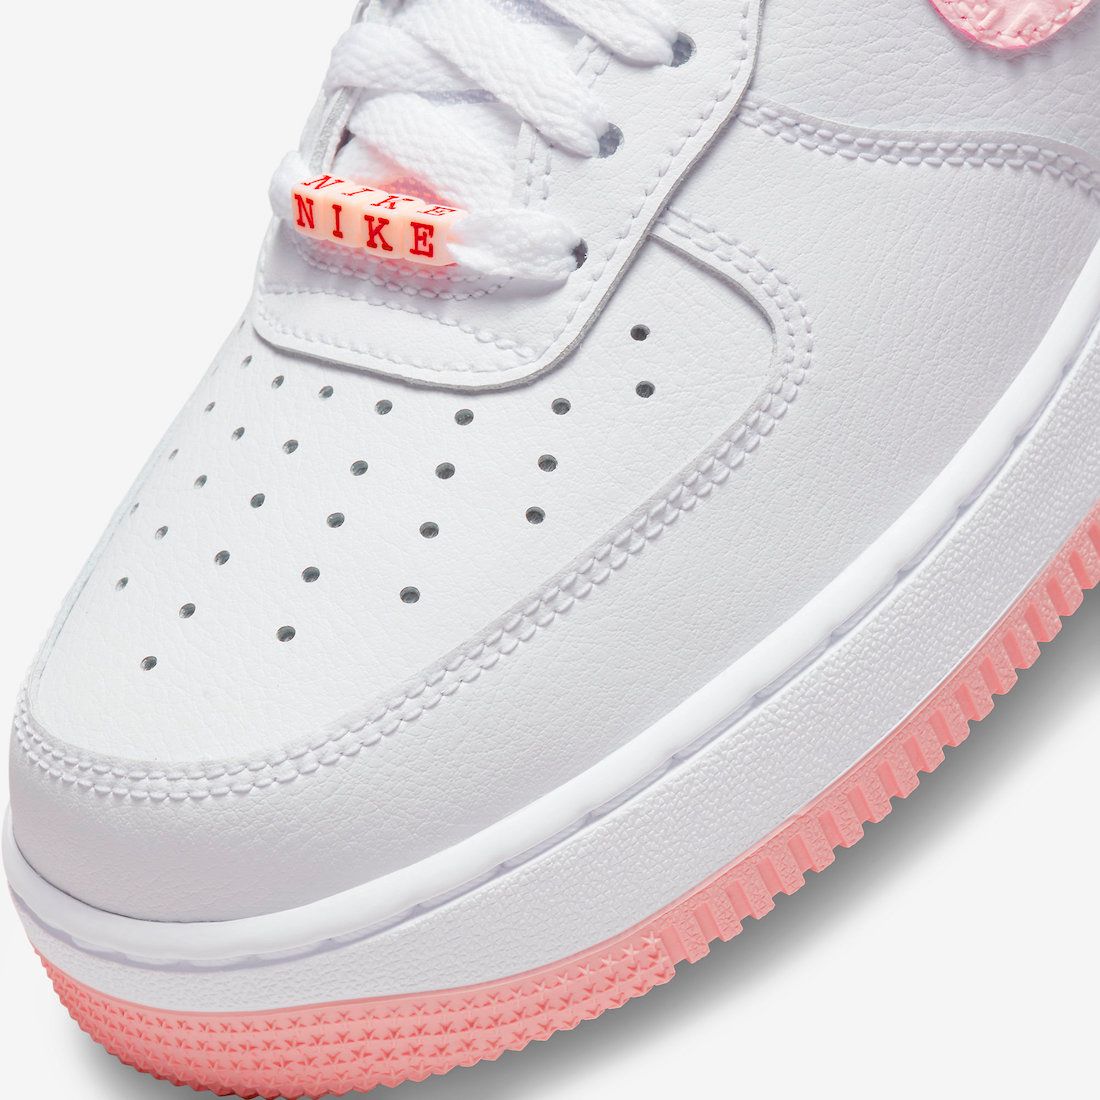 Rank informal Immersion Check Out Nike's 2022 Valentine's Day Air Force 1! - Sneaker Freaker